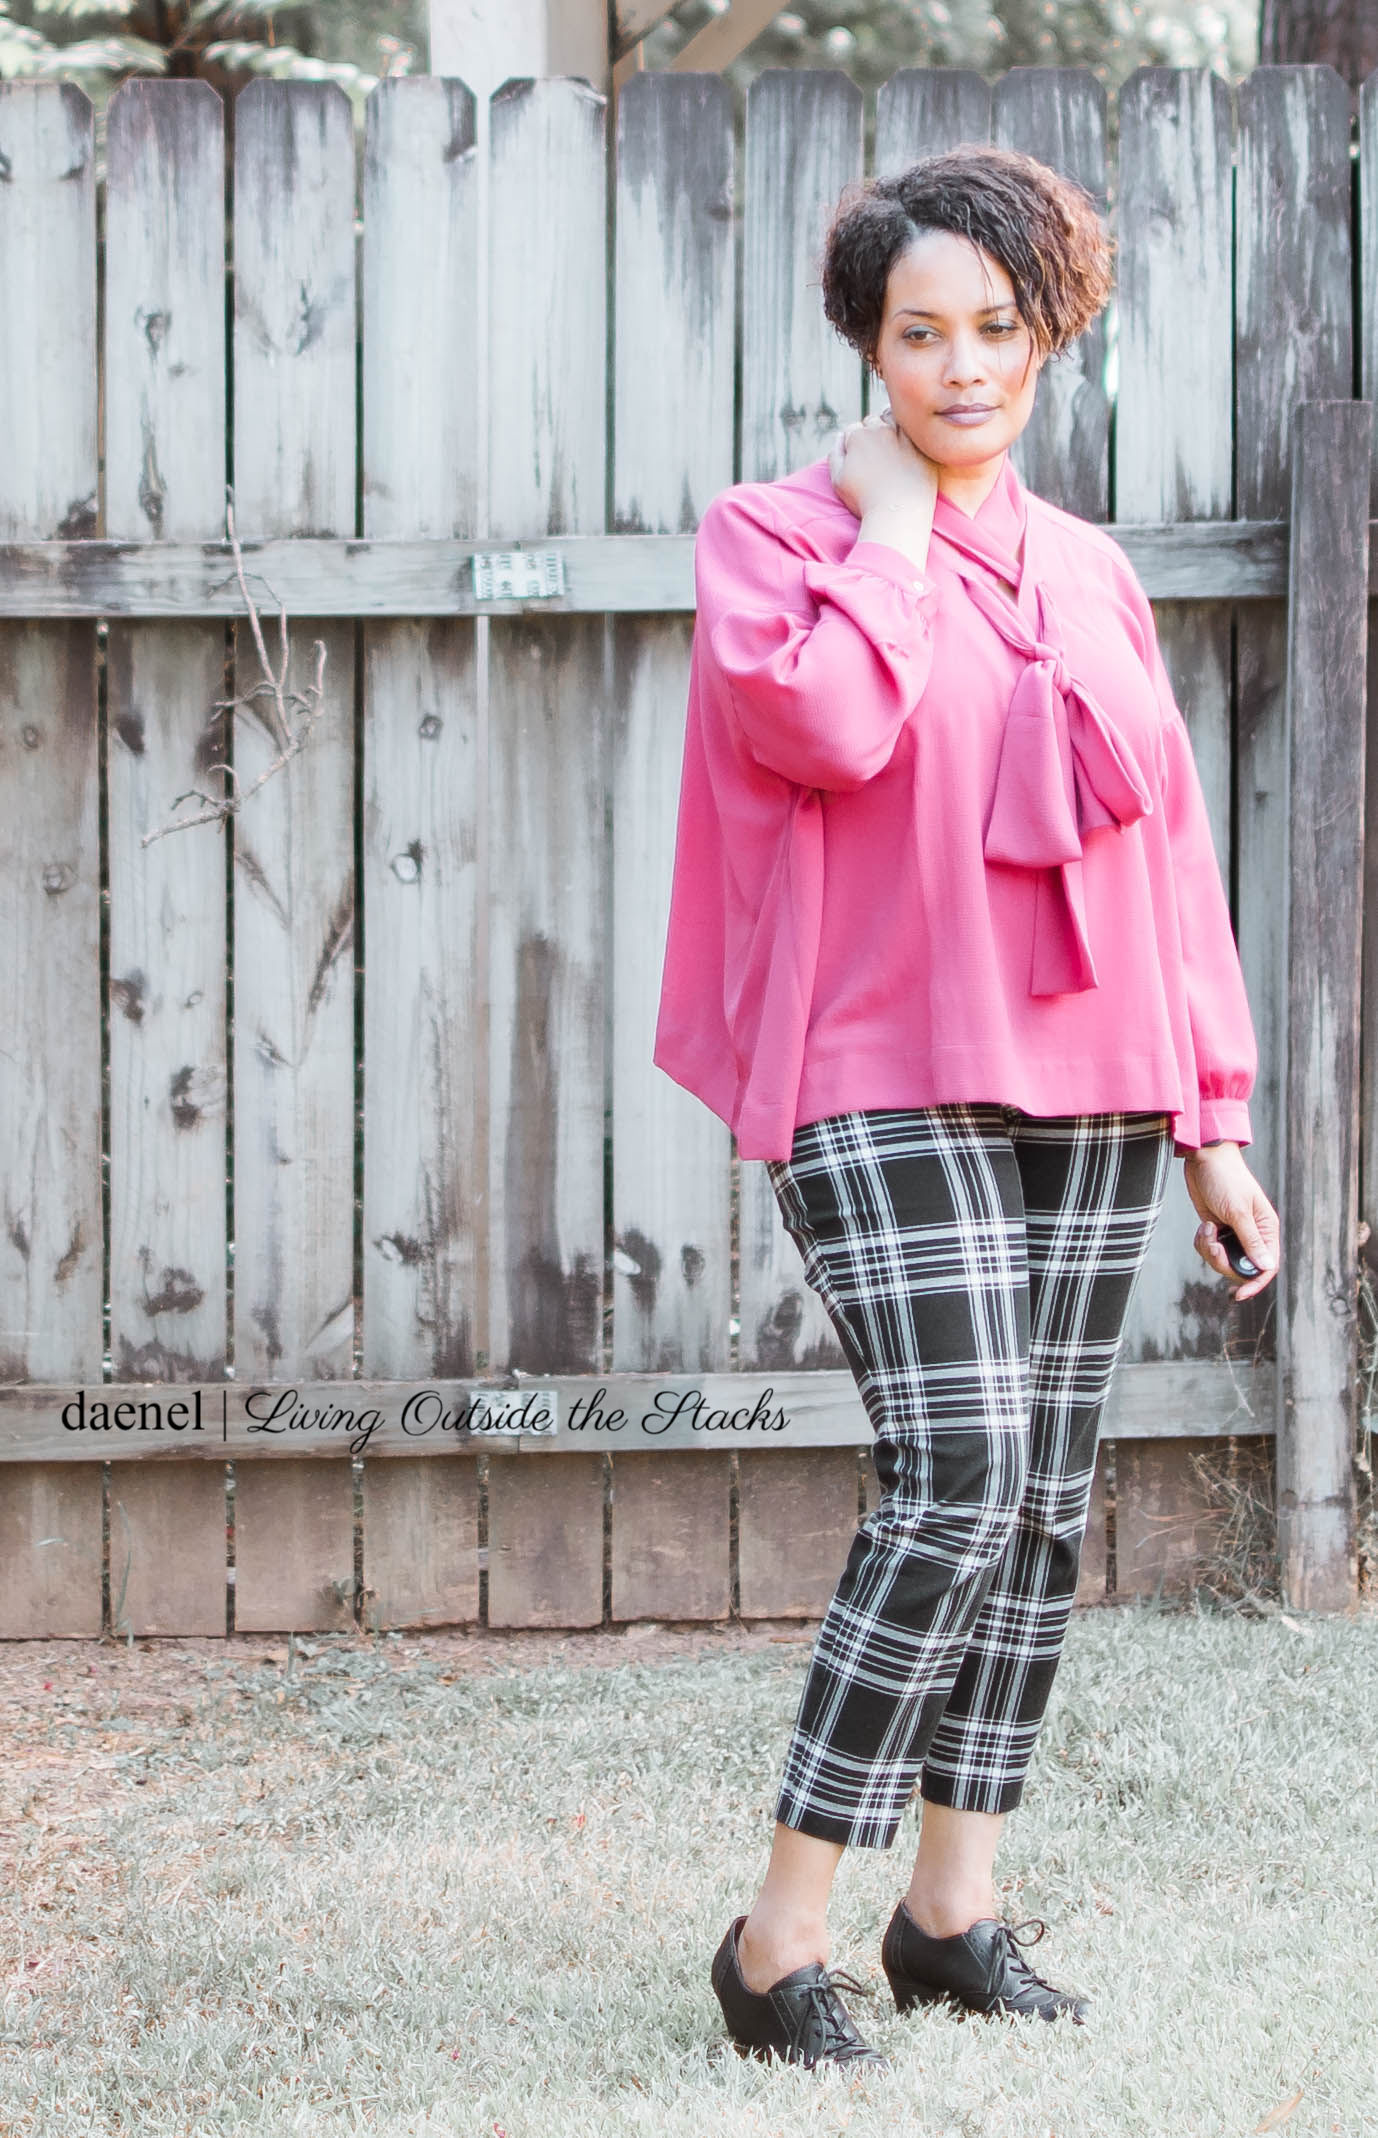 Cranberry Criss Cross Blouse by Laurie Felt Plaid Pixie Pants by Old Navy and Black Oxfords {living outside the stacks}